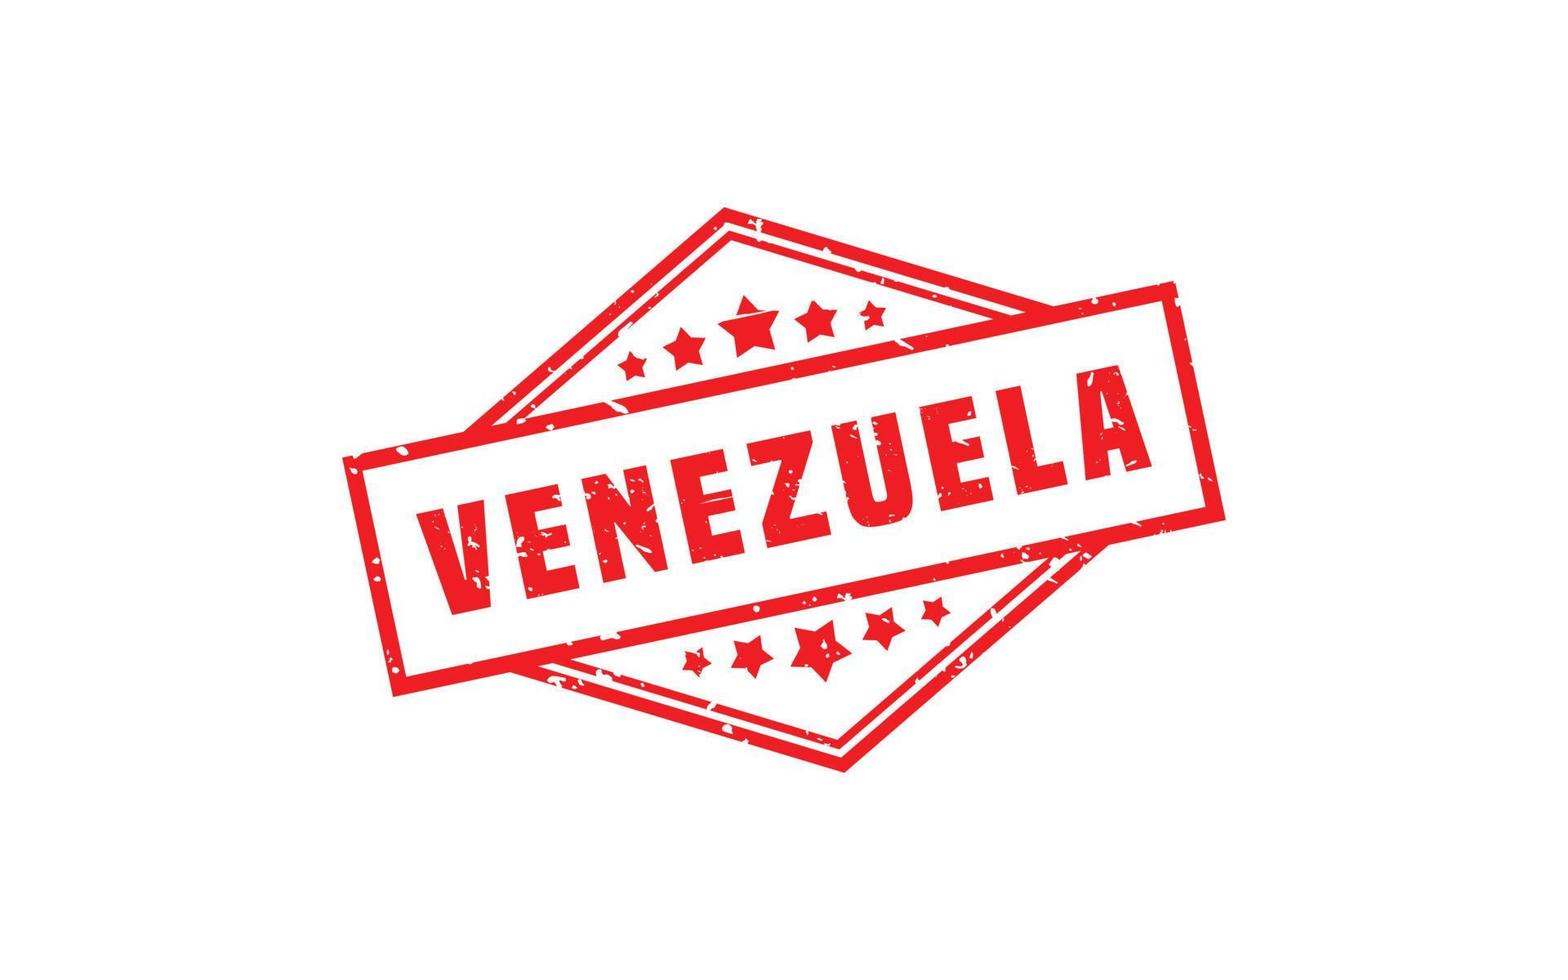 VENEZUELA stamp rubber with grunge style on white background vector